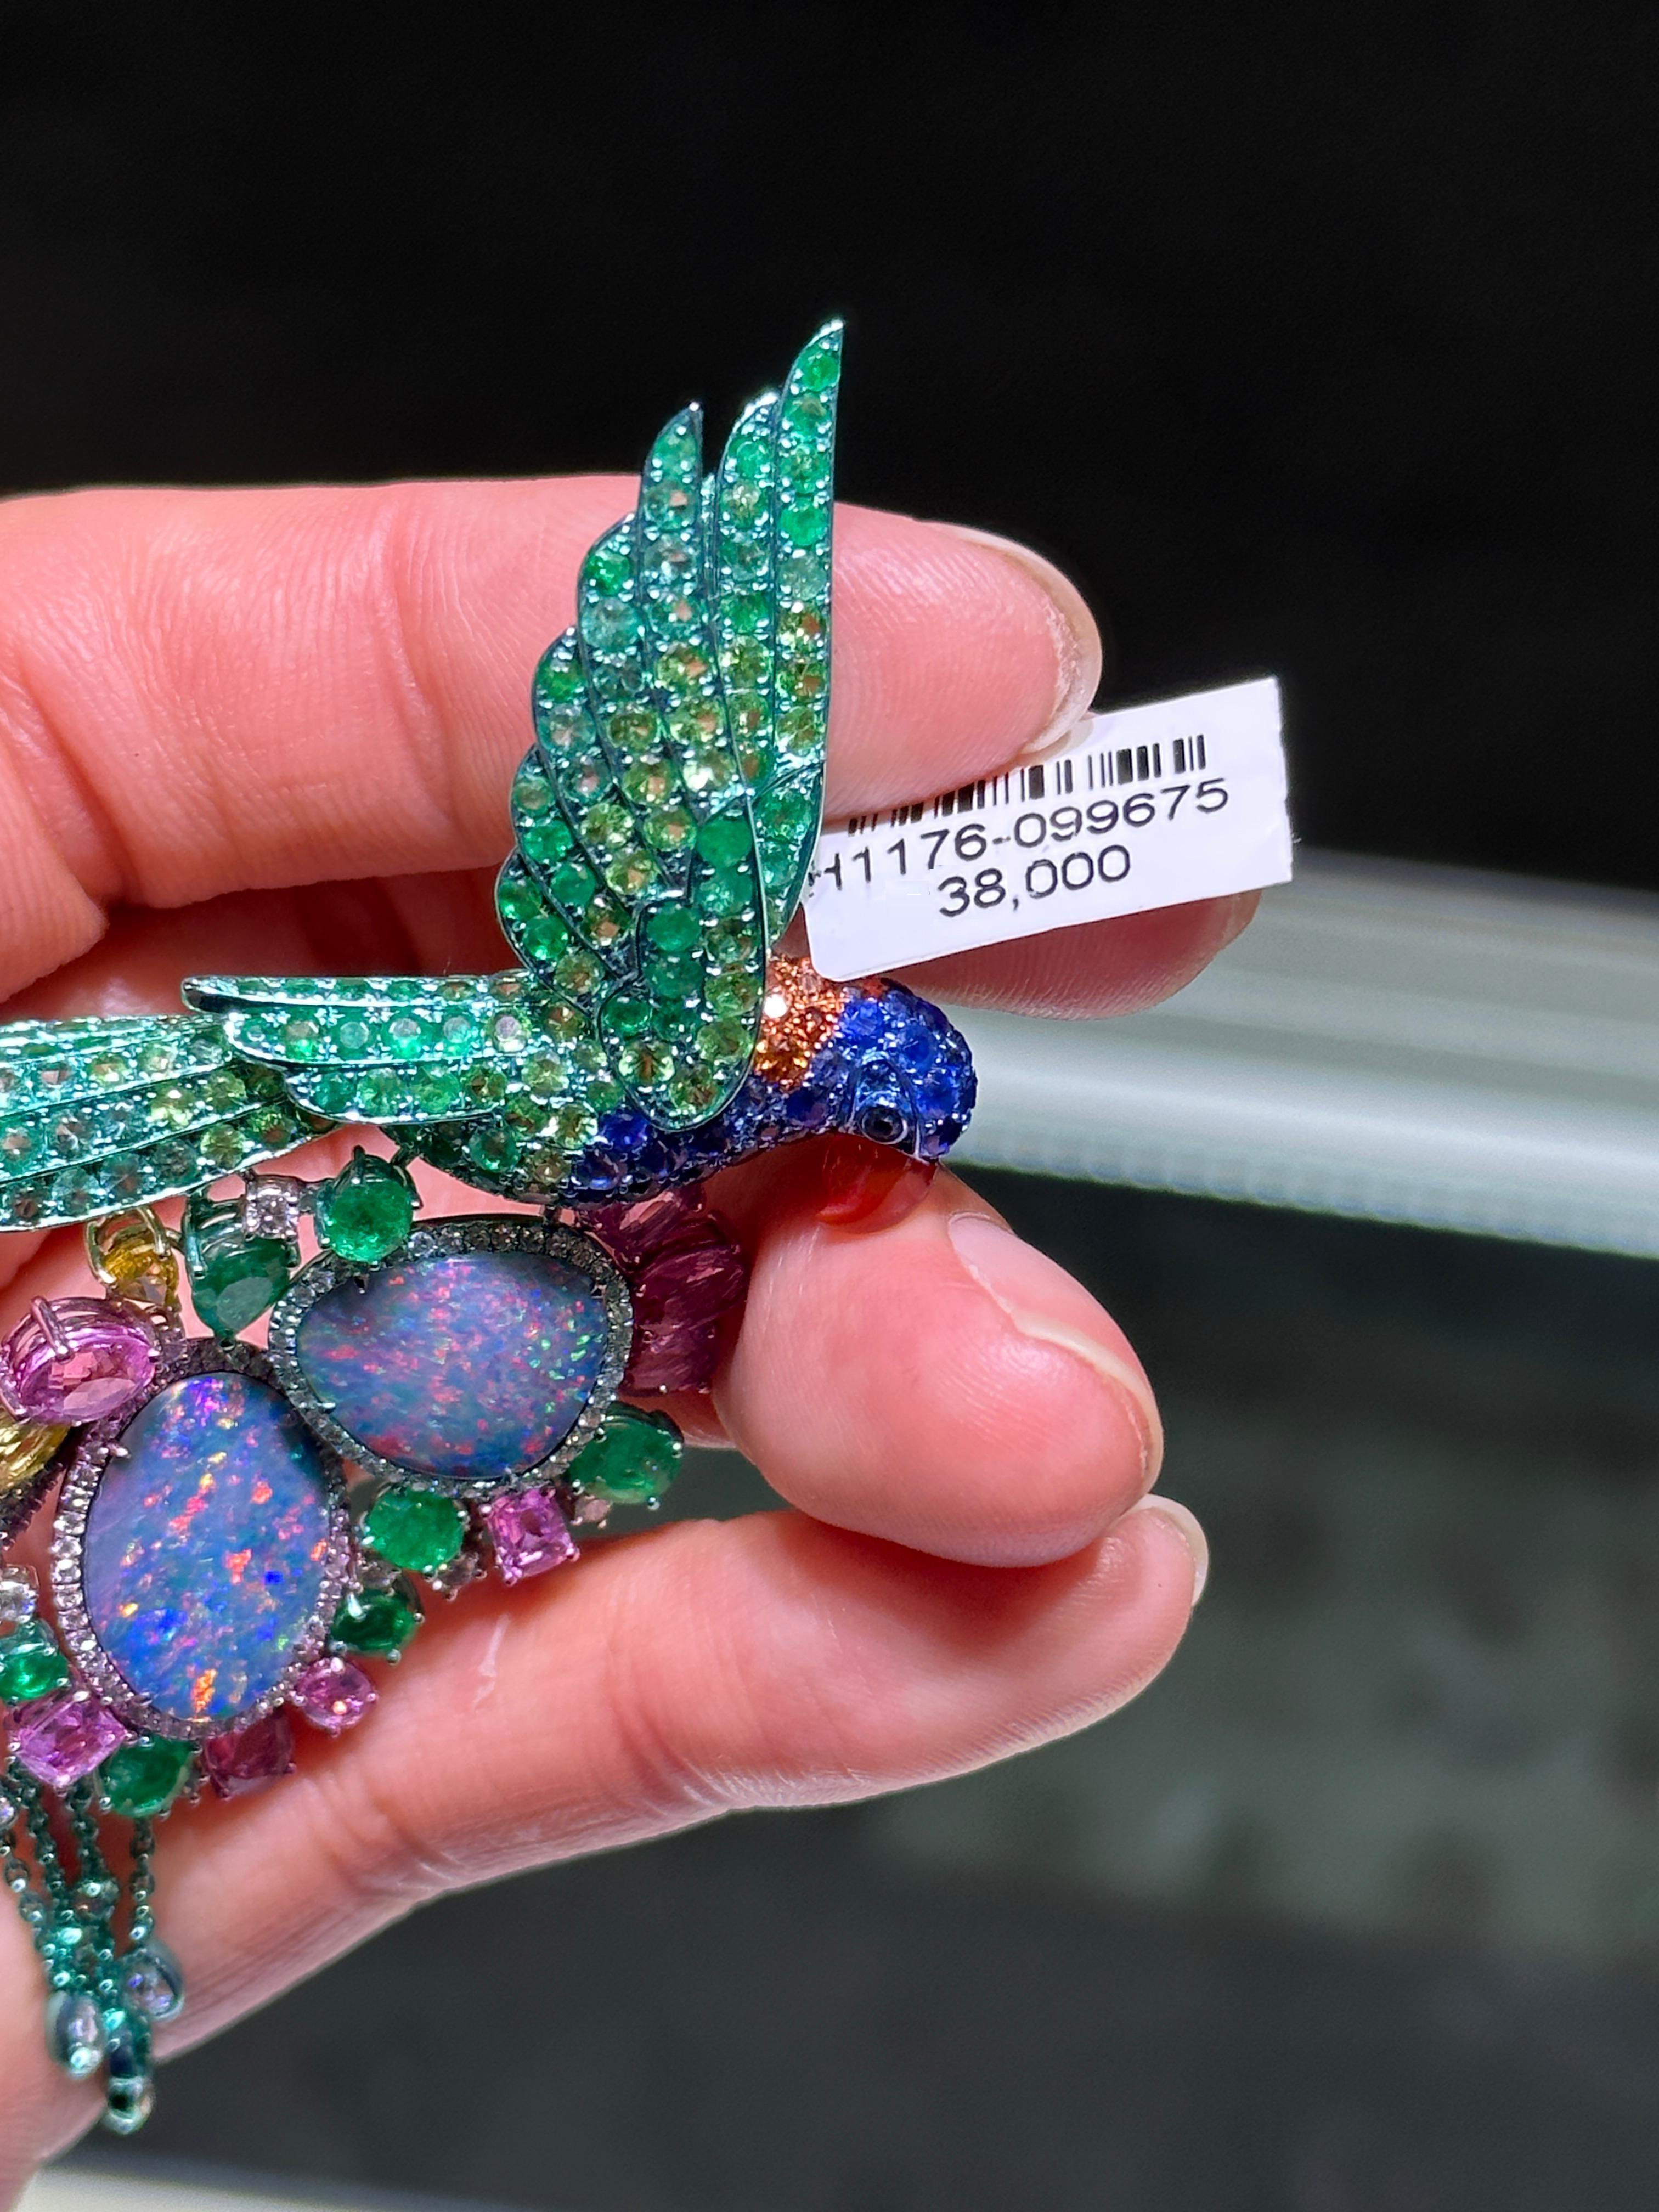 NWT $38, 000 Rare 18KT Black Opal Fancy Parrot Diamond Sapphire Emerald Brooch In New Condition For Sale In New York, NY